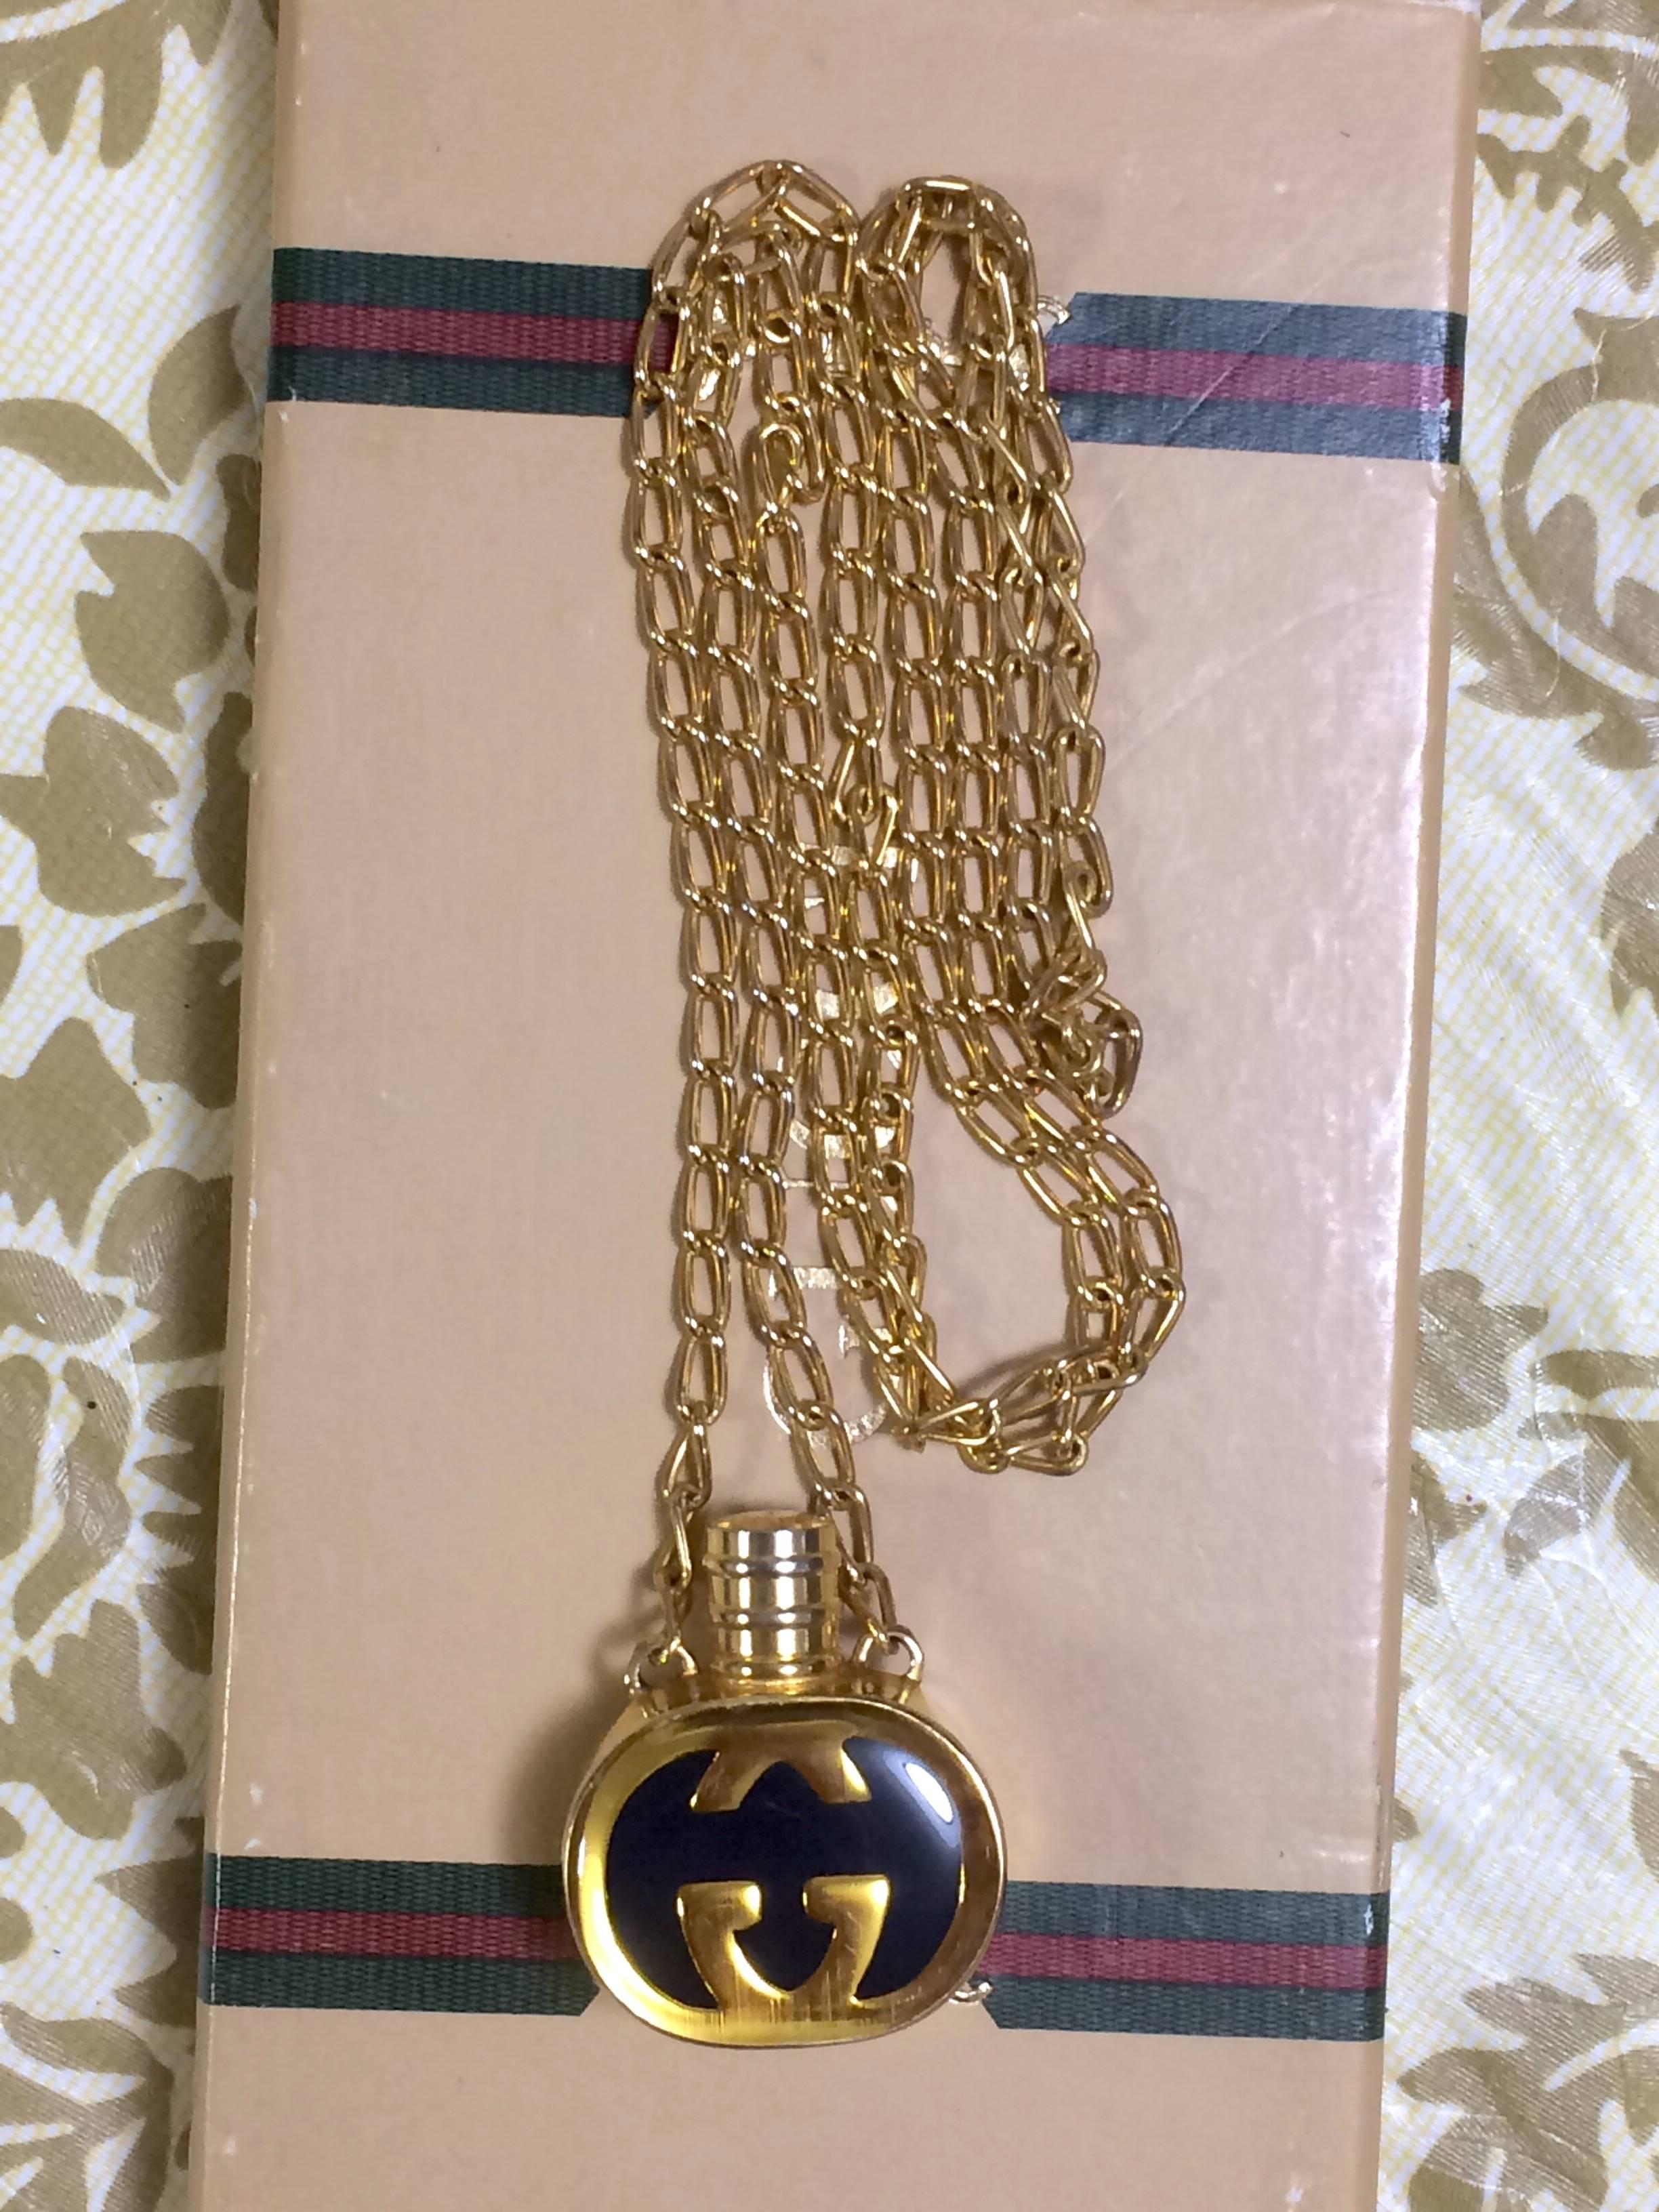 1980s. Vintage Gucci gold and navy round shape perfume bottle necklace with iconic logo mark. Perfect rare Gucci gift.

Beautiful vintage condition!

If you are looking for vintage Gucci necklace, then do not miss this opportunity!
Here is another